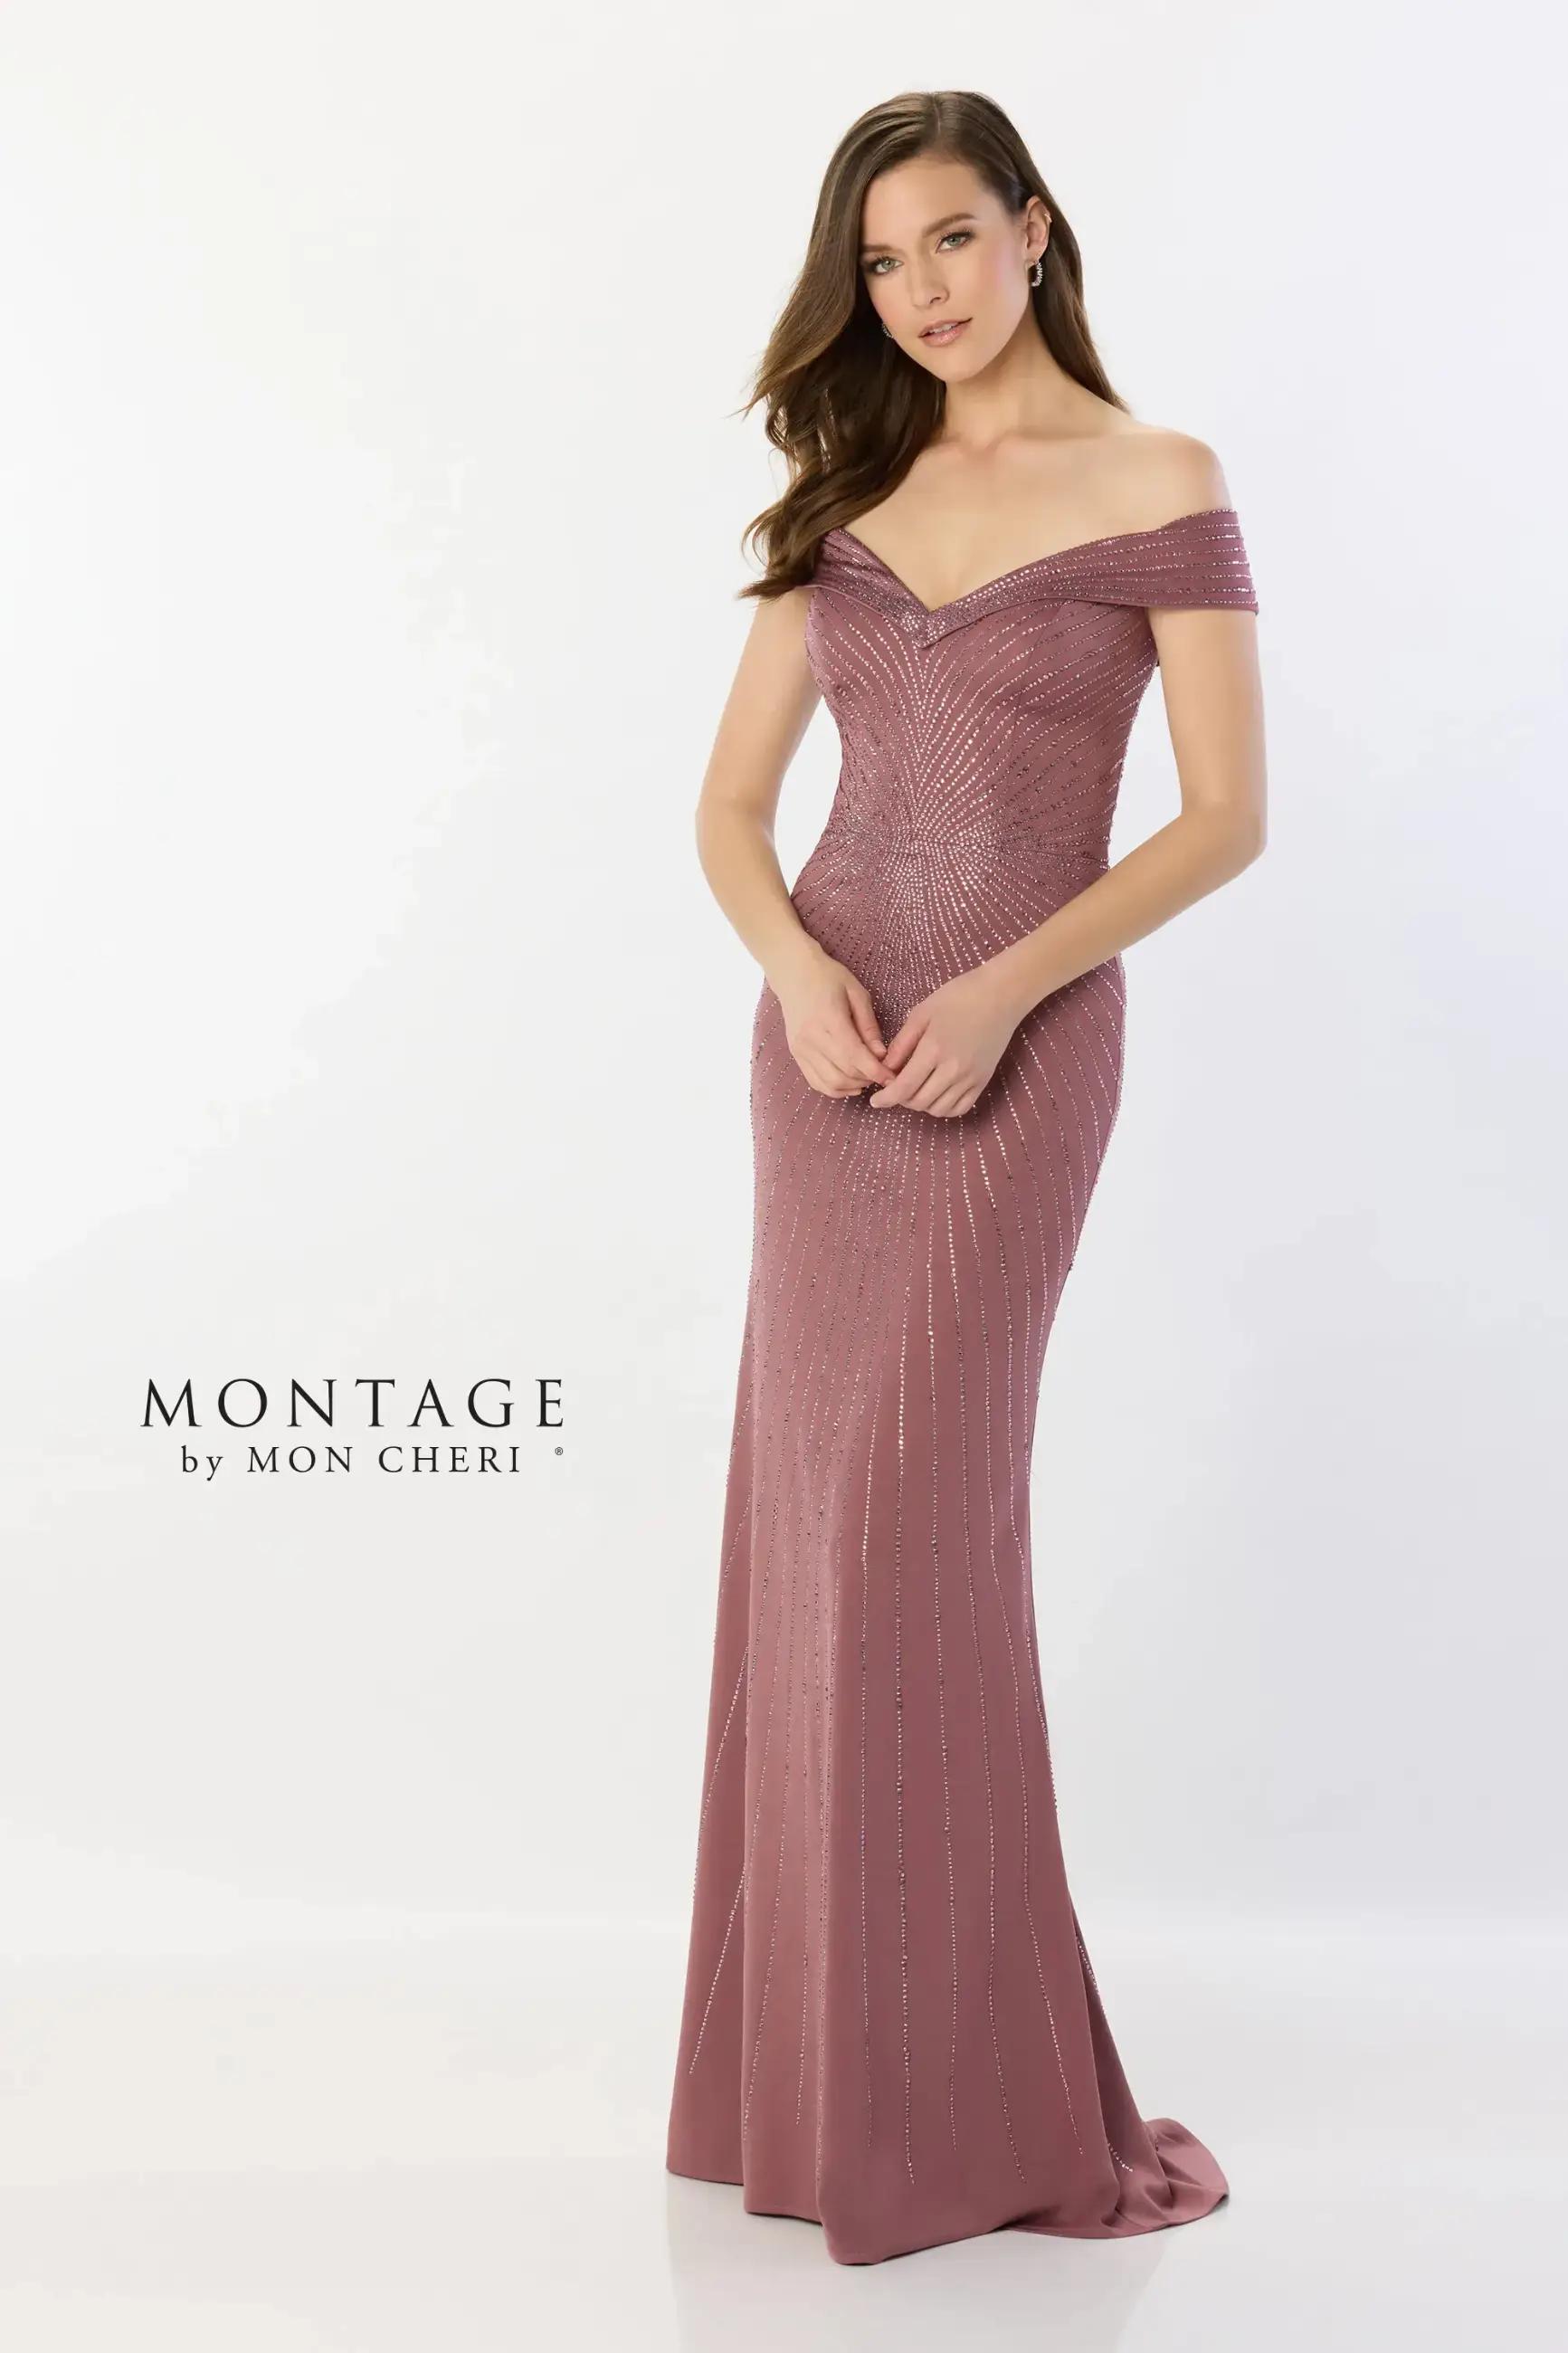 Trends in Mother of the Bride Gowns for the Fashion-Forward Mom Image